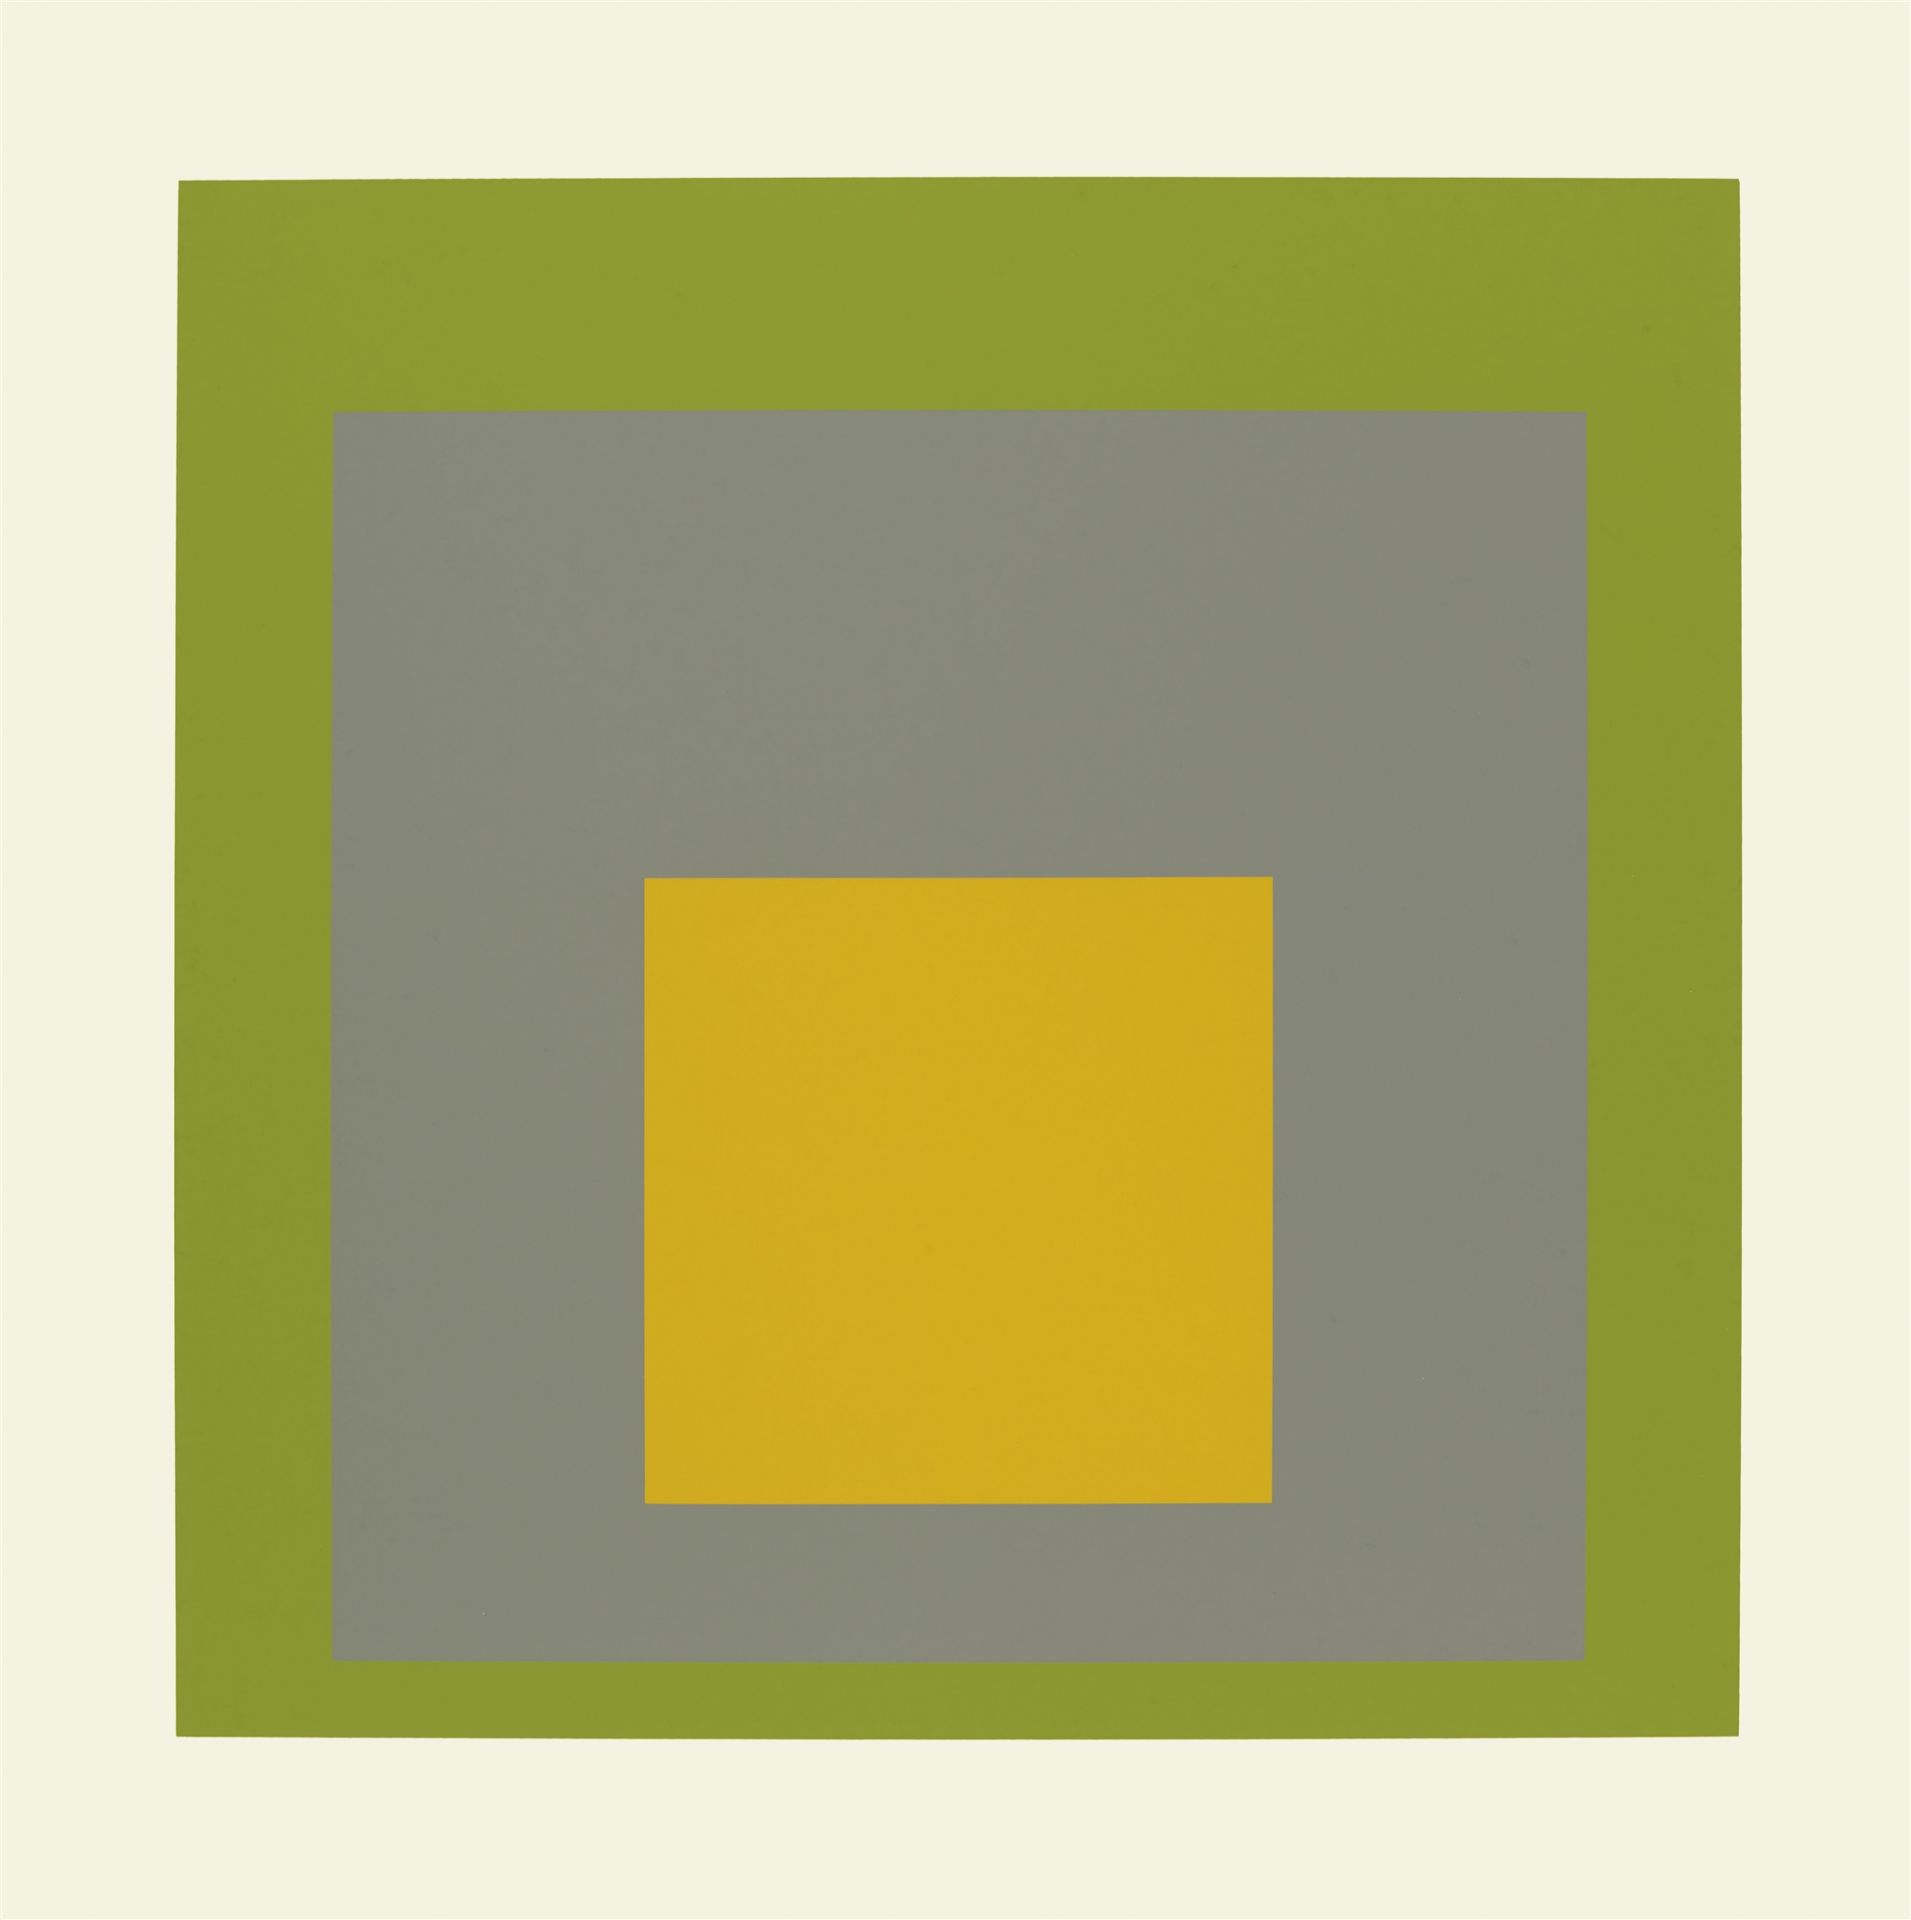 Josef Albers, SP (Homage to the Square) - Image 13 of 13